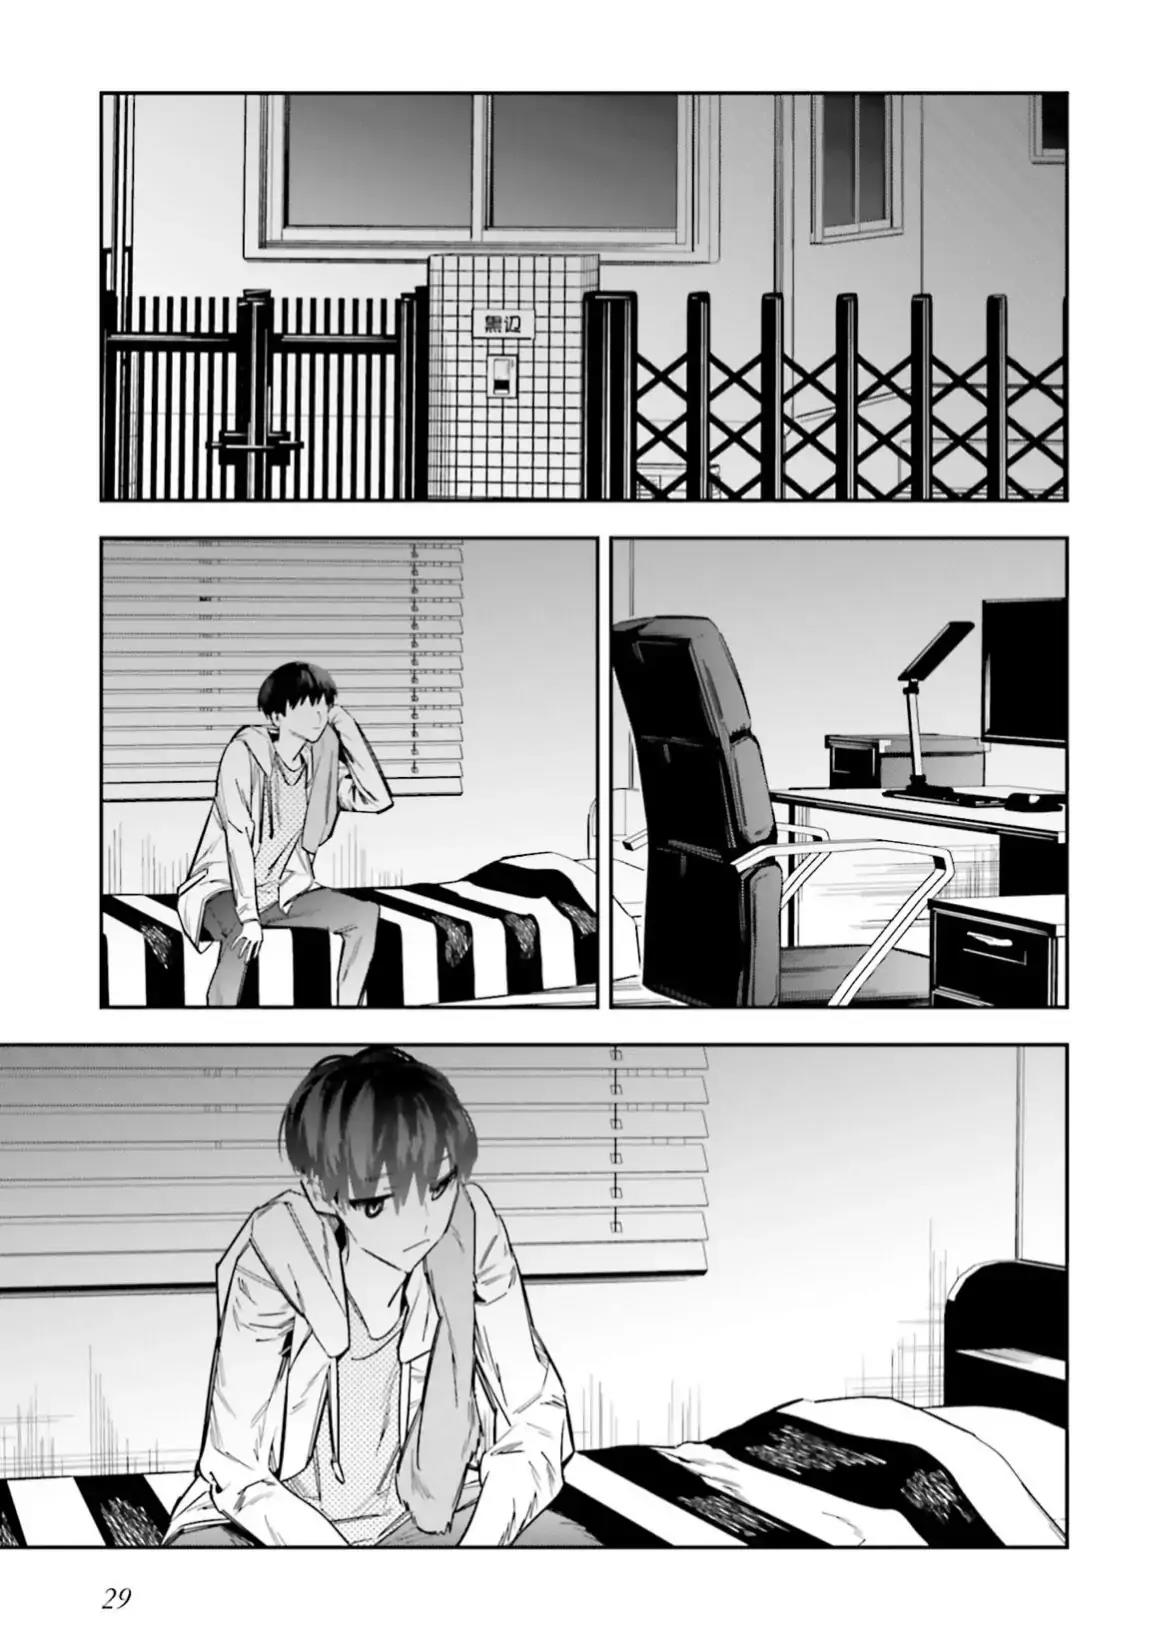 I Reincarnated as the Little Sister of a Death Game Manga’s Murder Mastermind and Failed Chapter 5